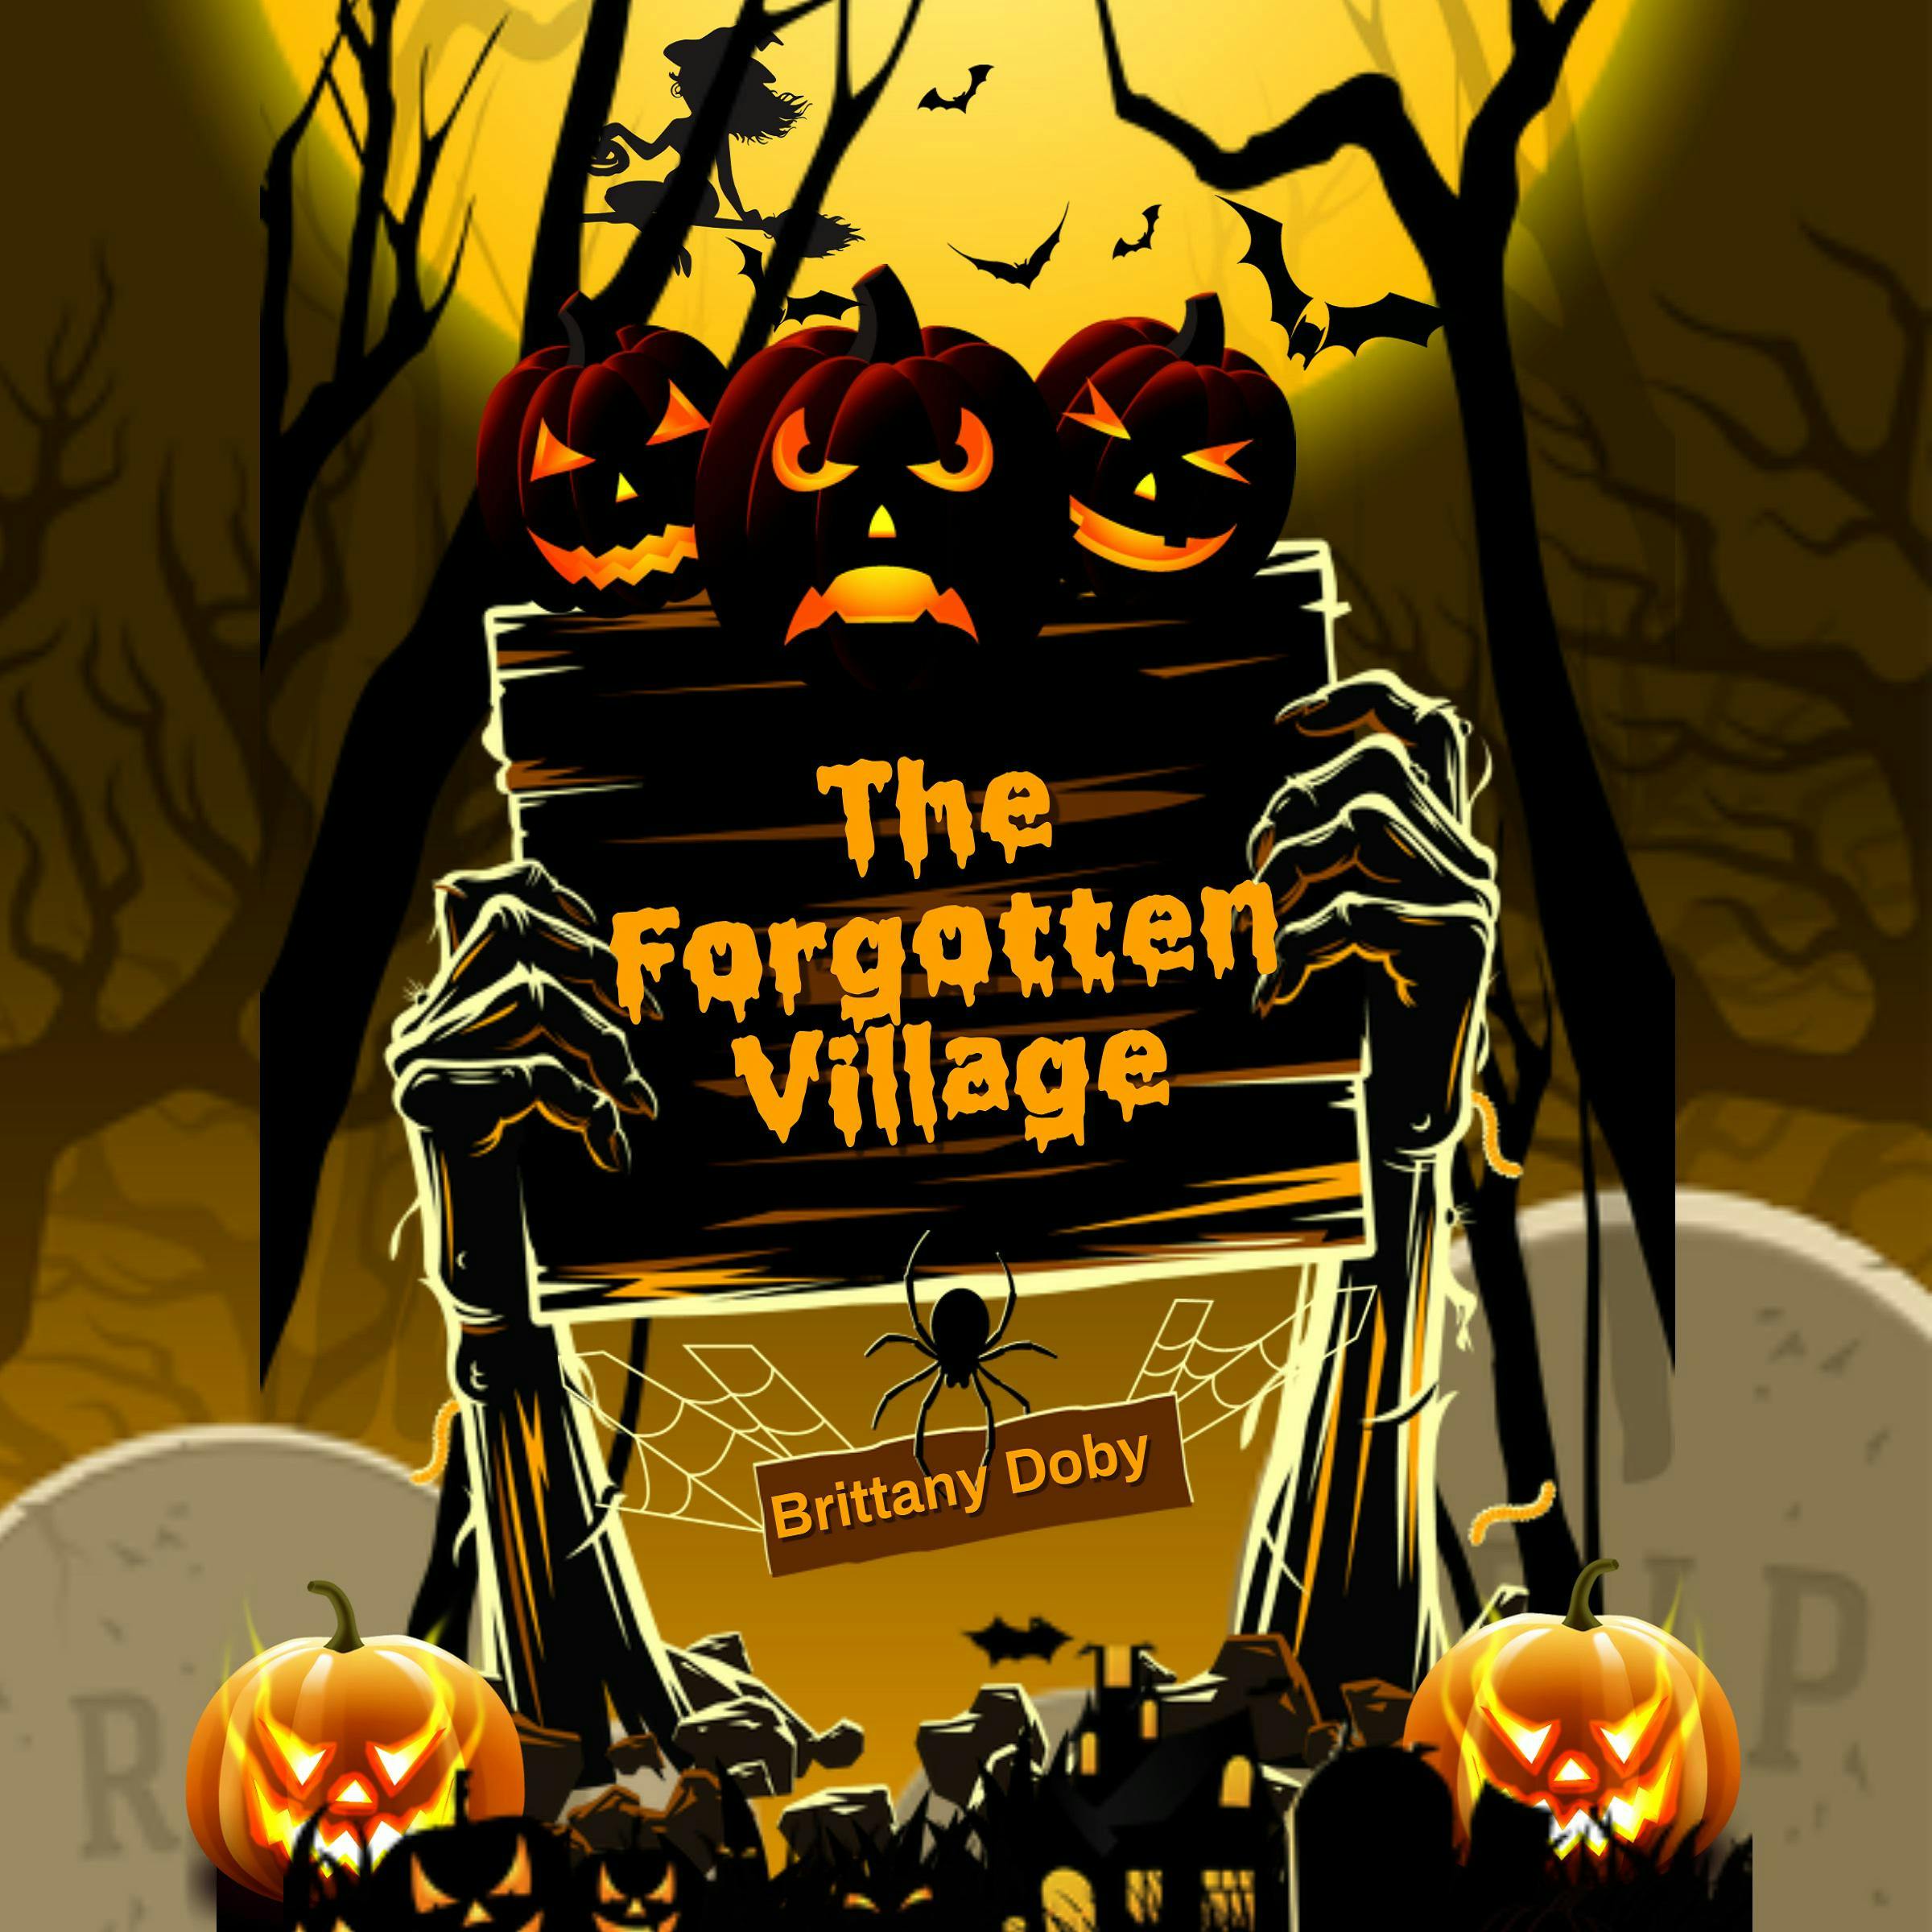 The Forgotten Village - Brittany Doby